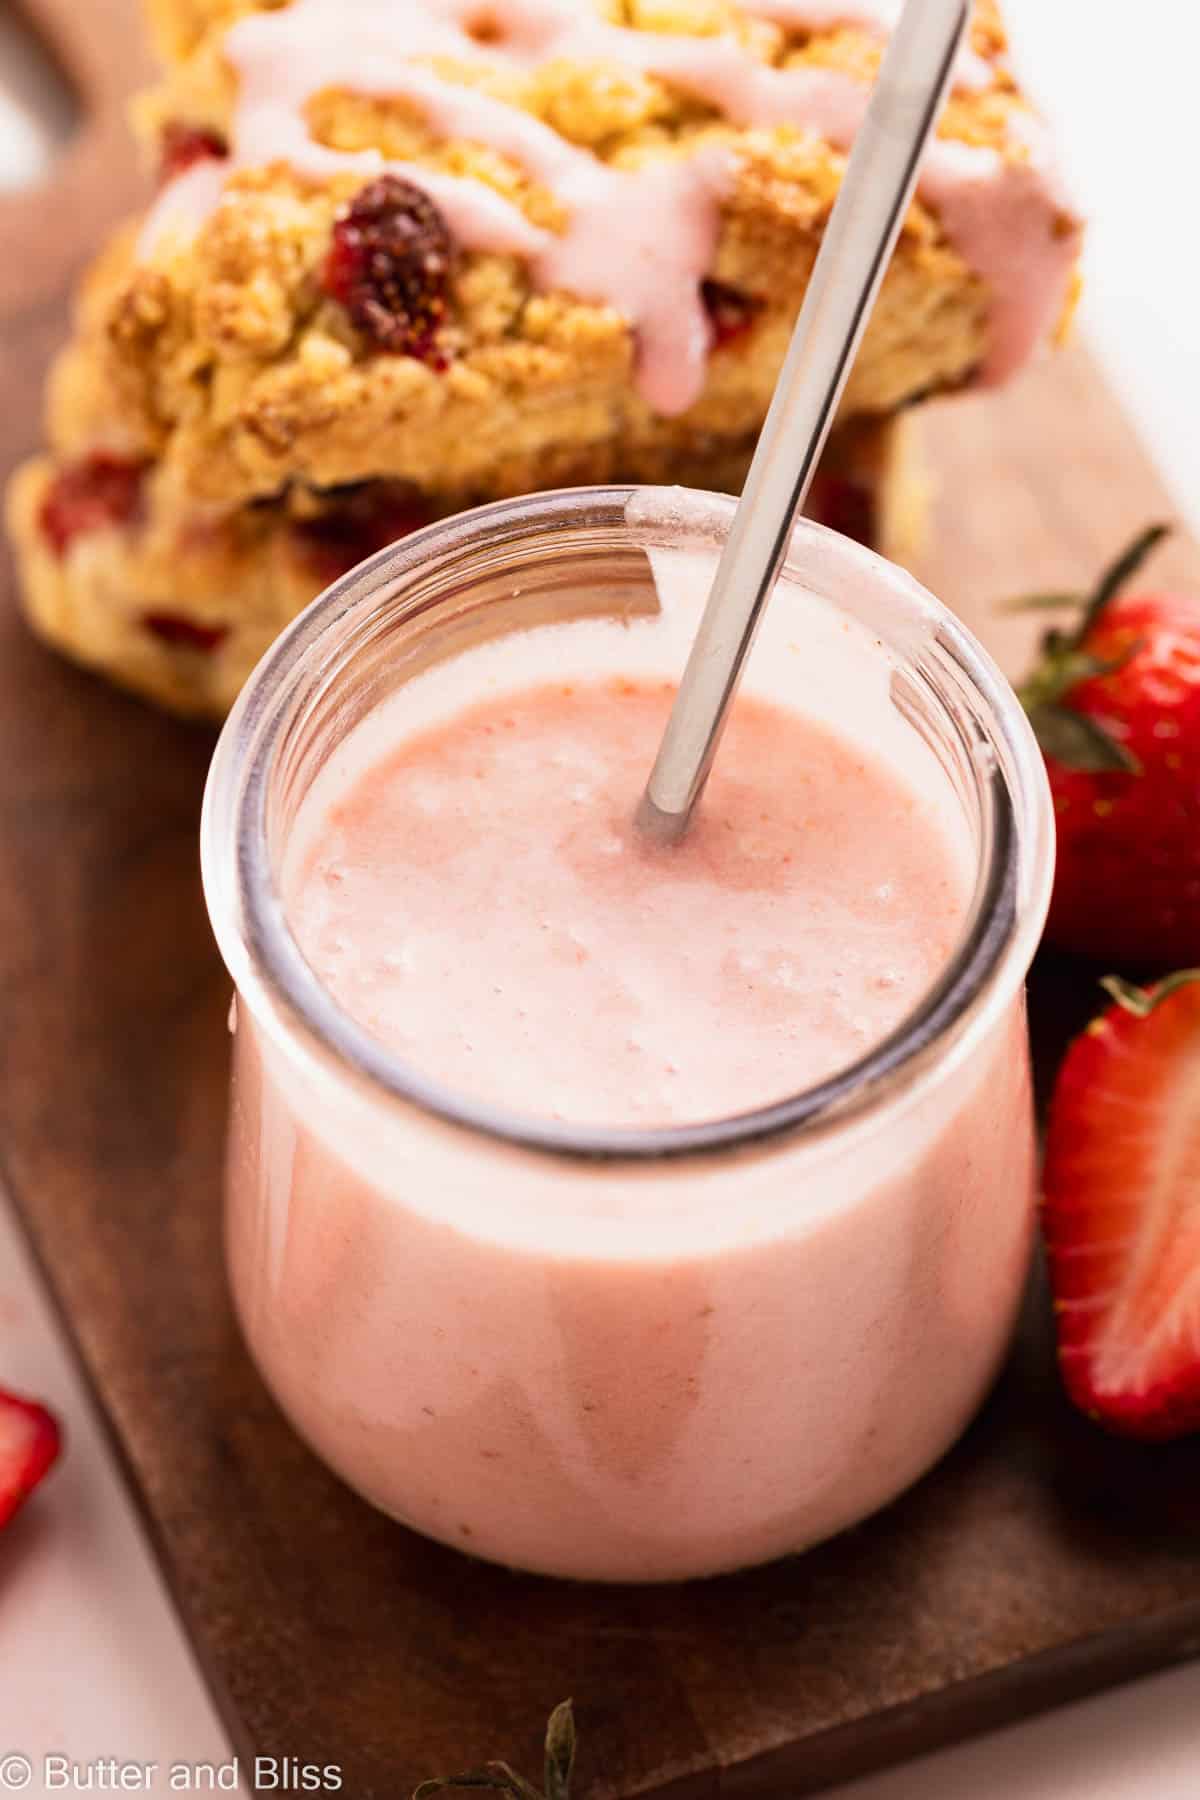 Fresh strawberry glaze in a small glass jar surrounded by pastries.